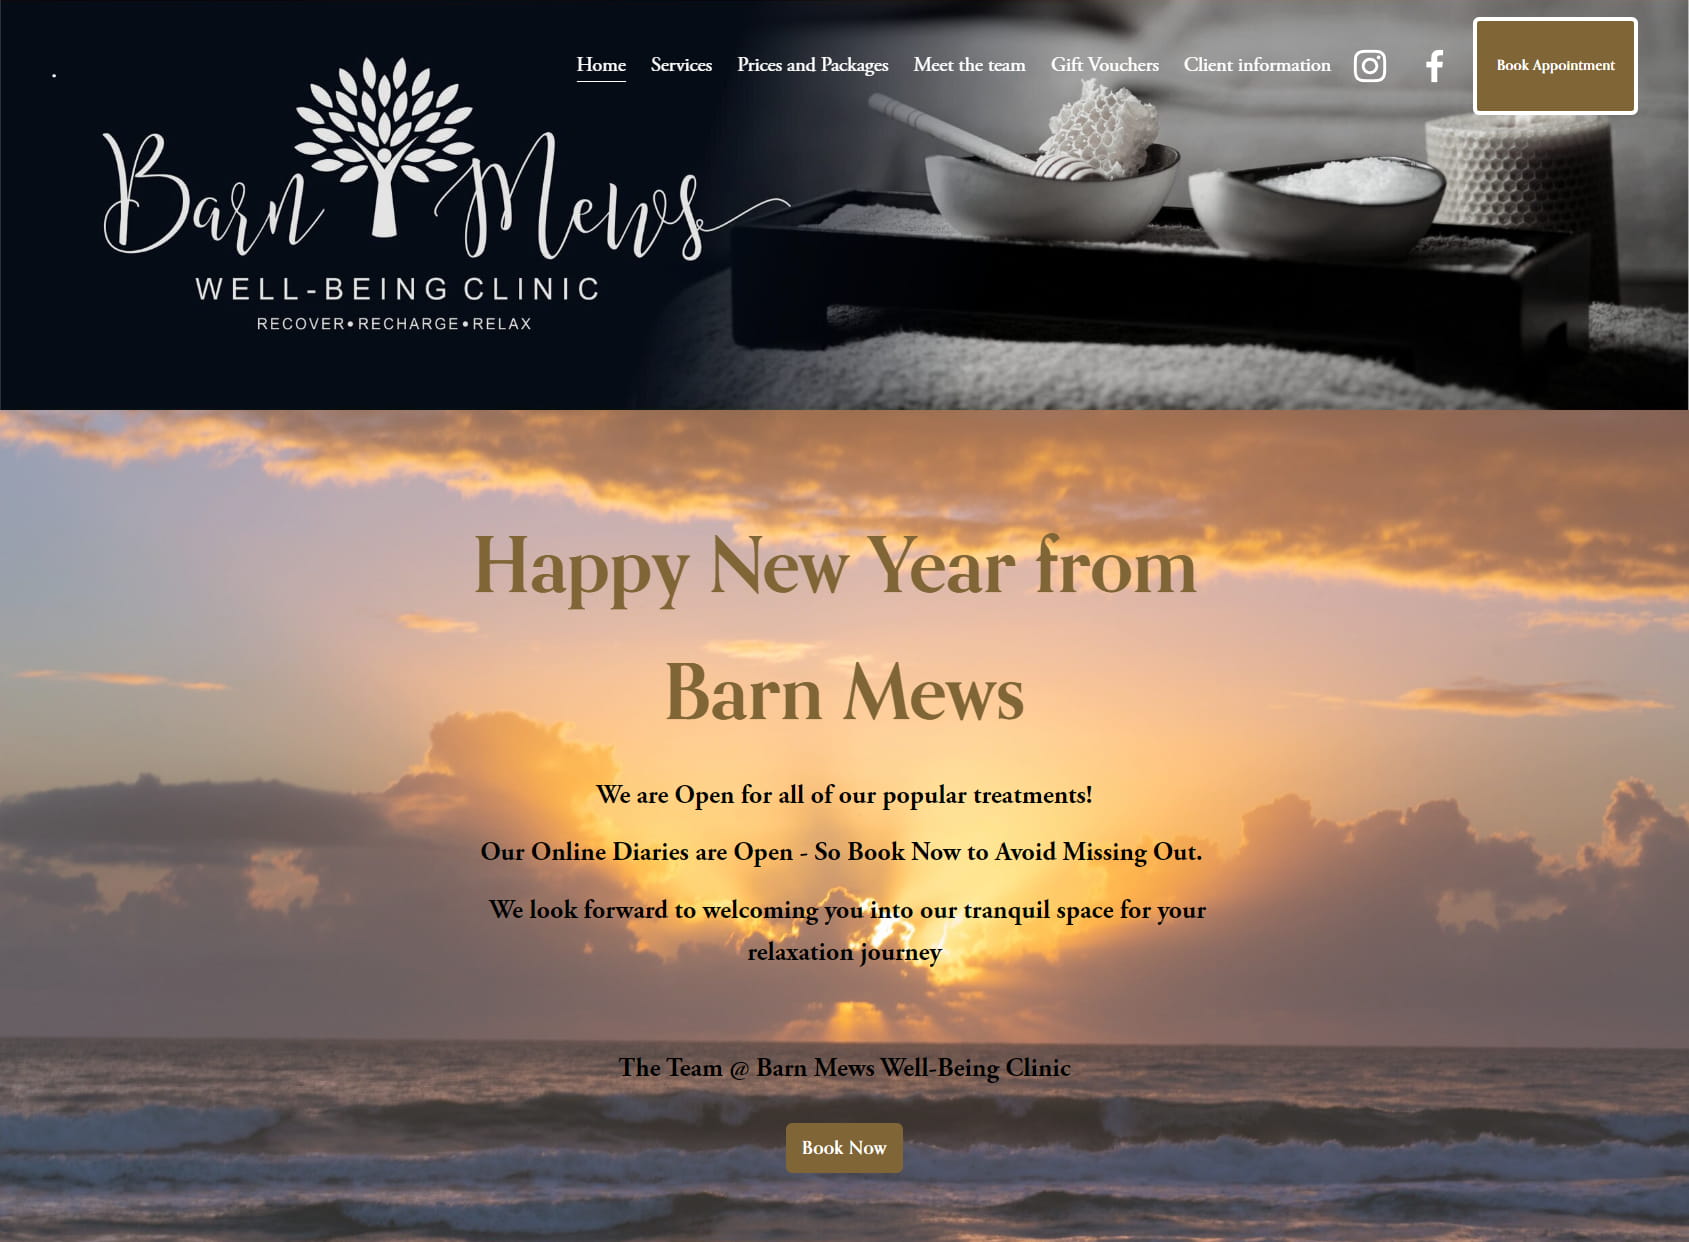 Barn Mews Well-Being Clinic